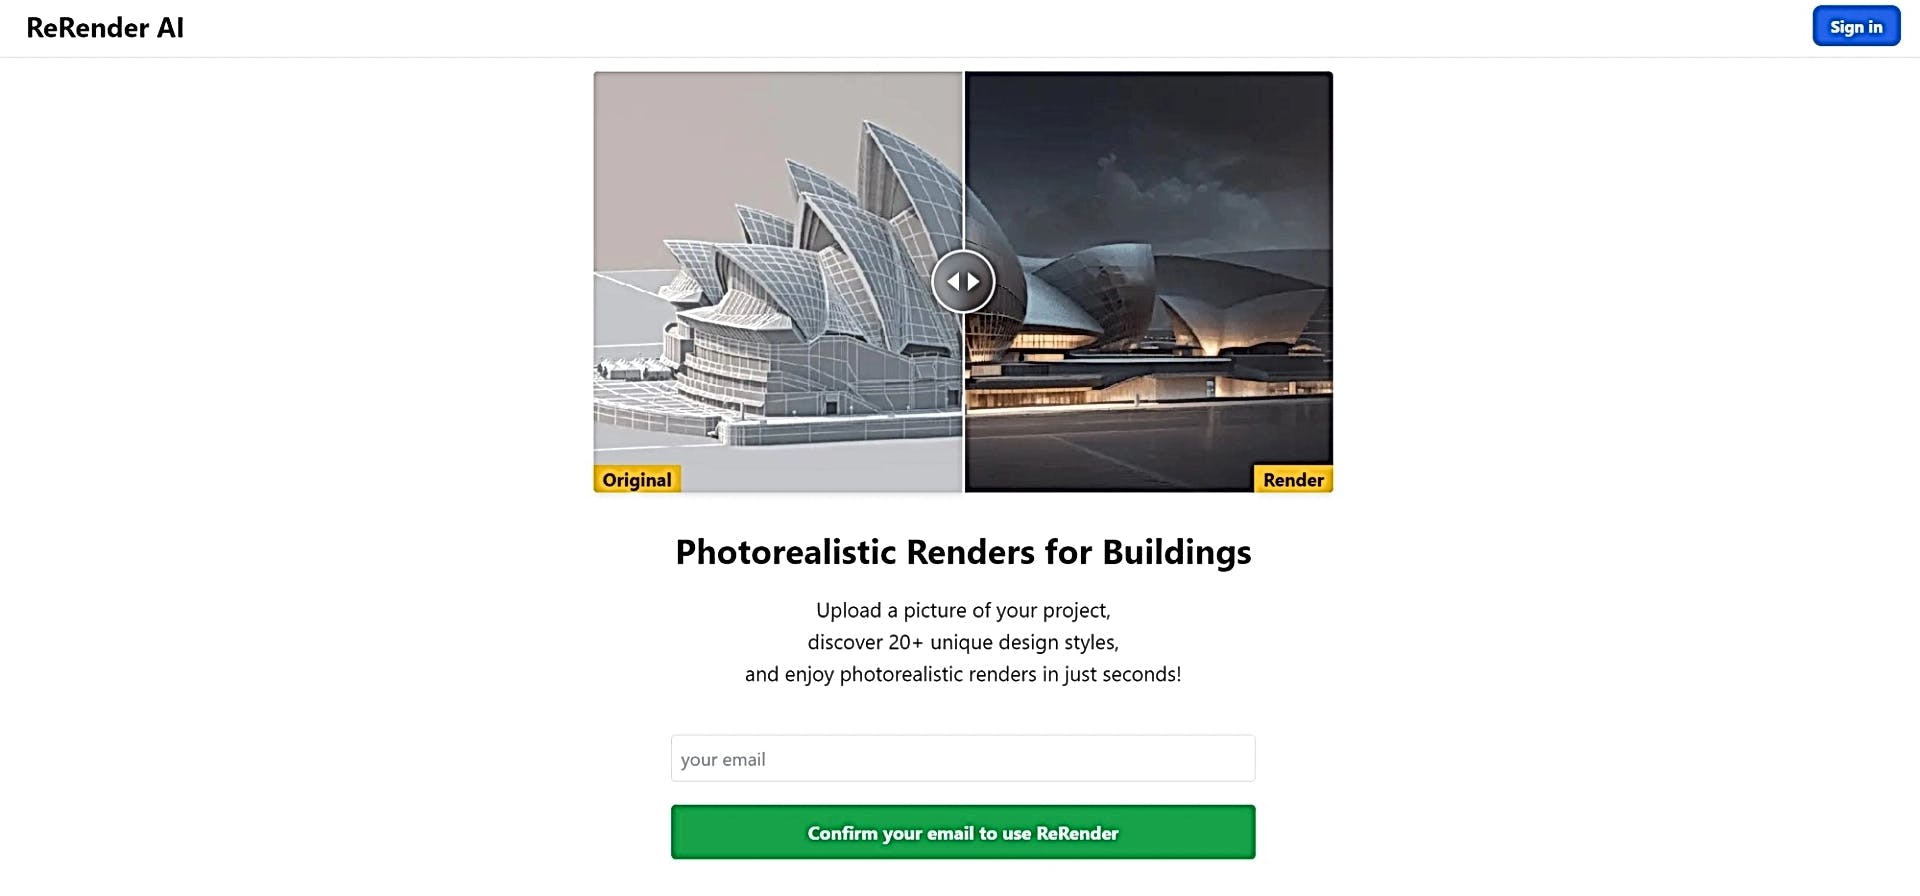 ReRender AI featured